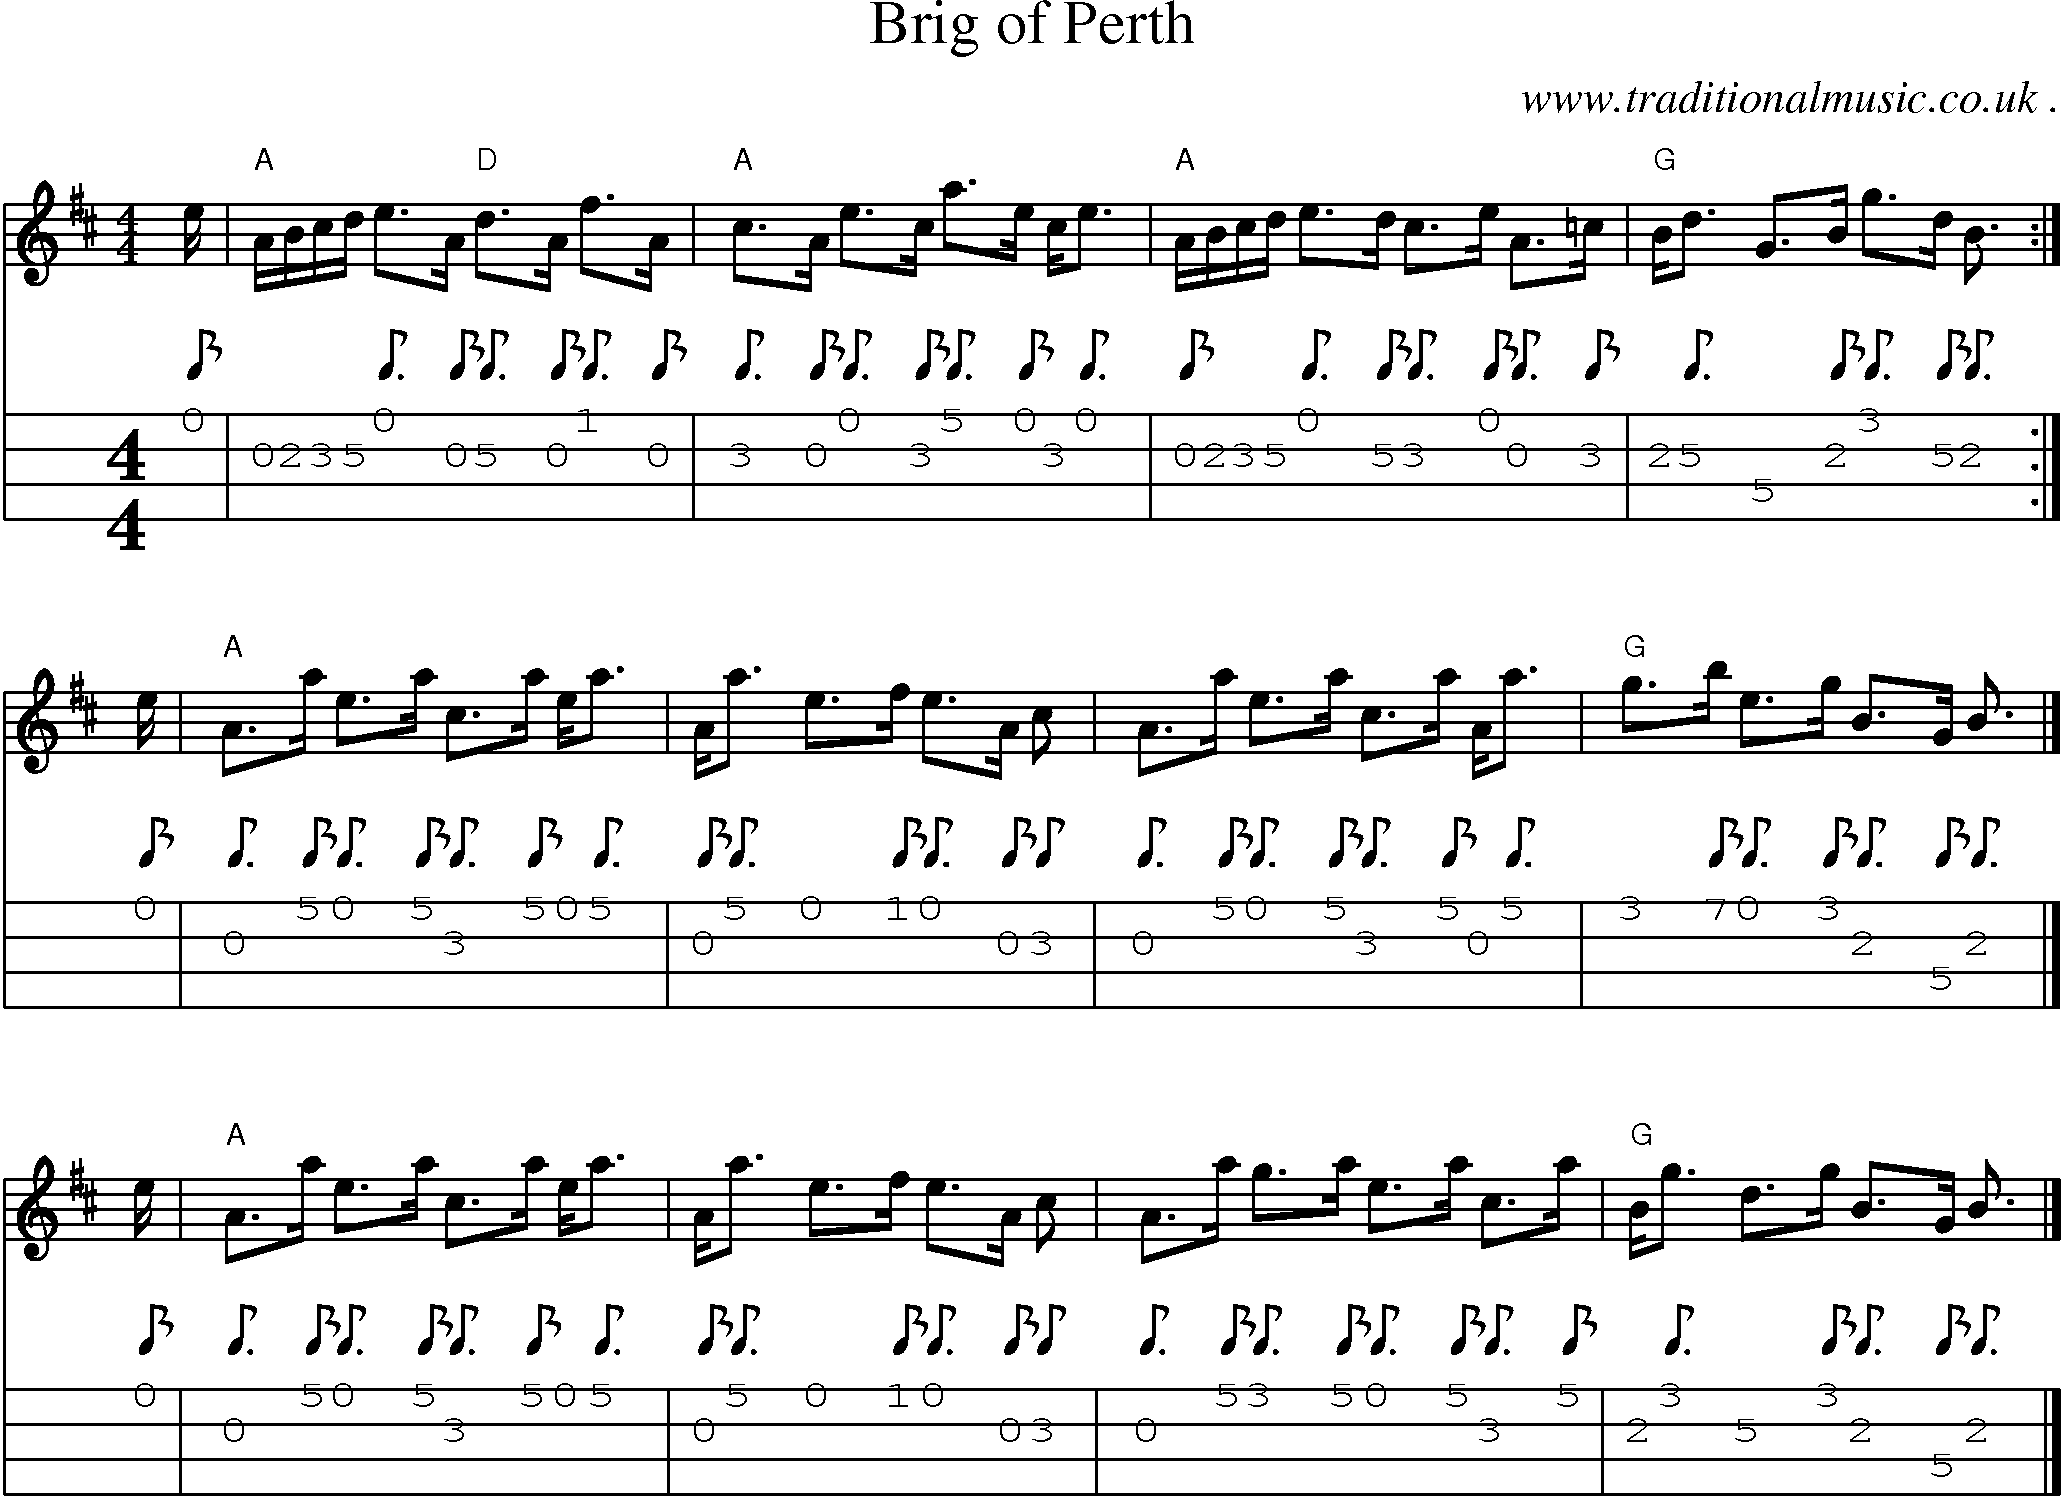 Sheet-music  score, Chords and Mandolin Tabs for Brig Of Perth